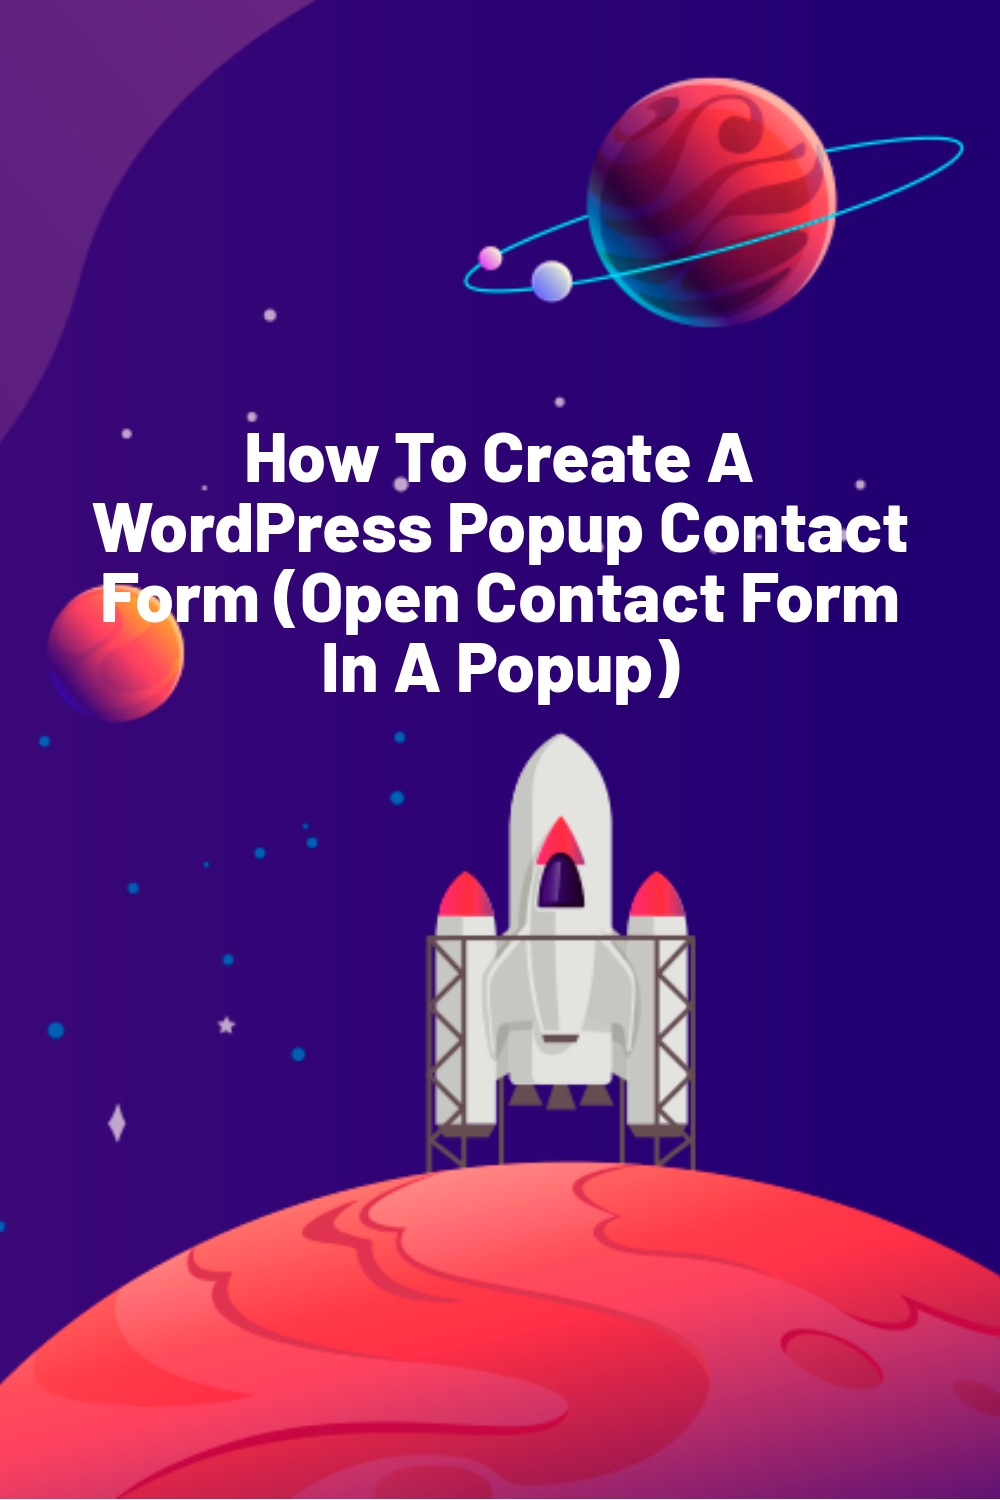 How To Create A WordPress Popup Contact Form (Open Contact Form In A Popup)